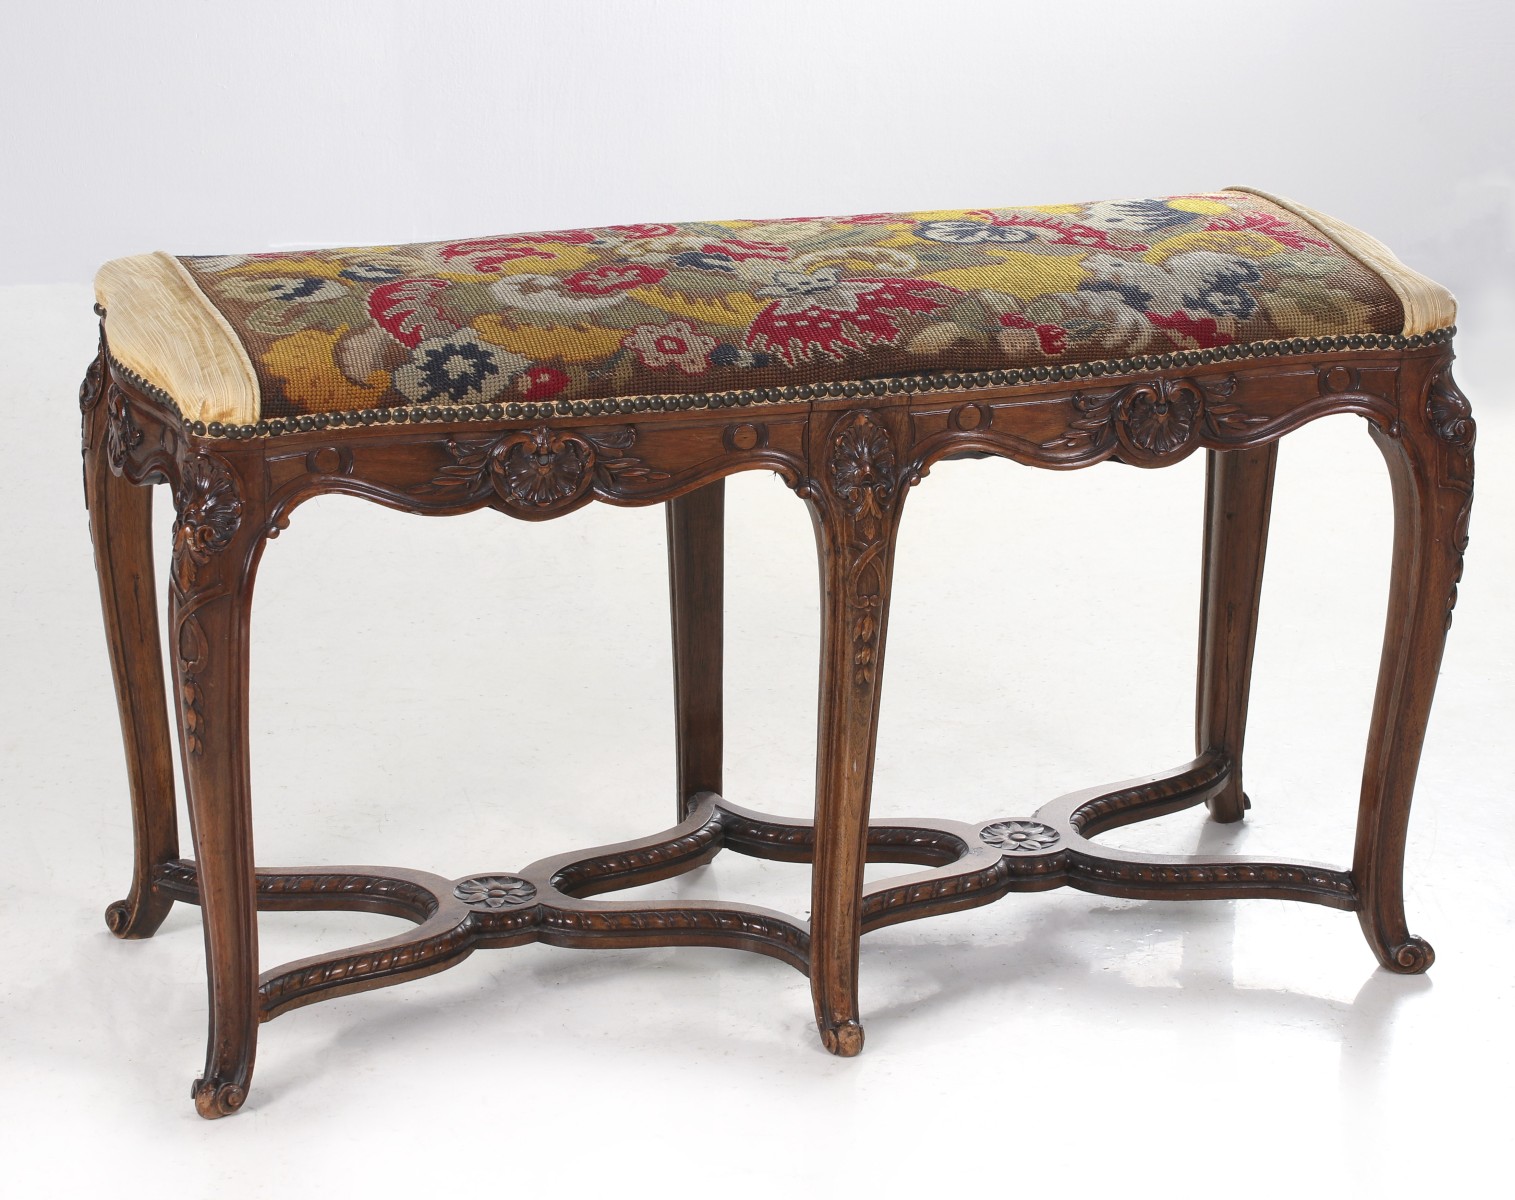 AN EARLY 20TH C. LOUIS XIV STYLE BENCH WITH NEEDLEPOINT